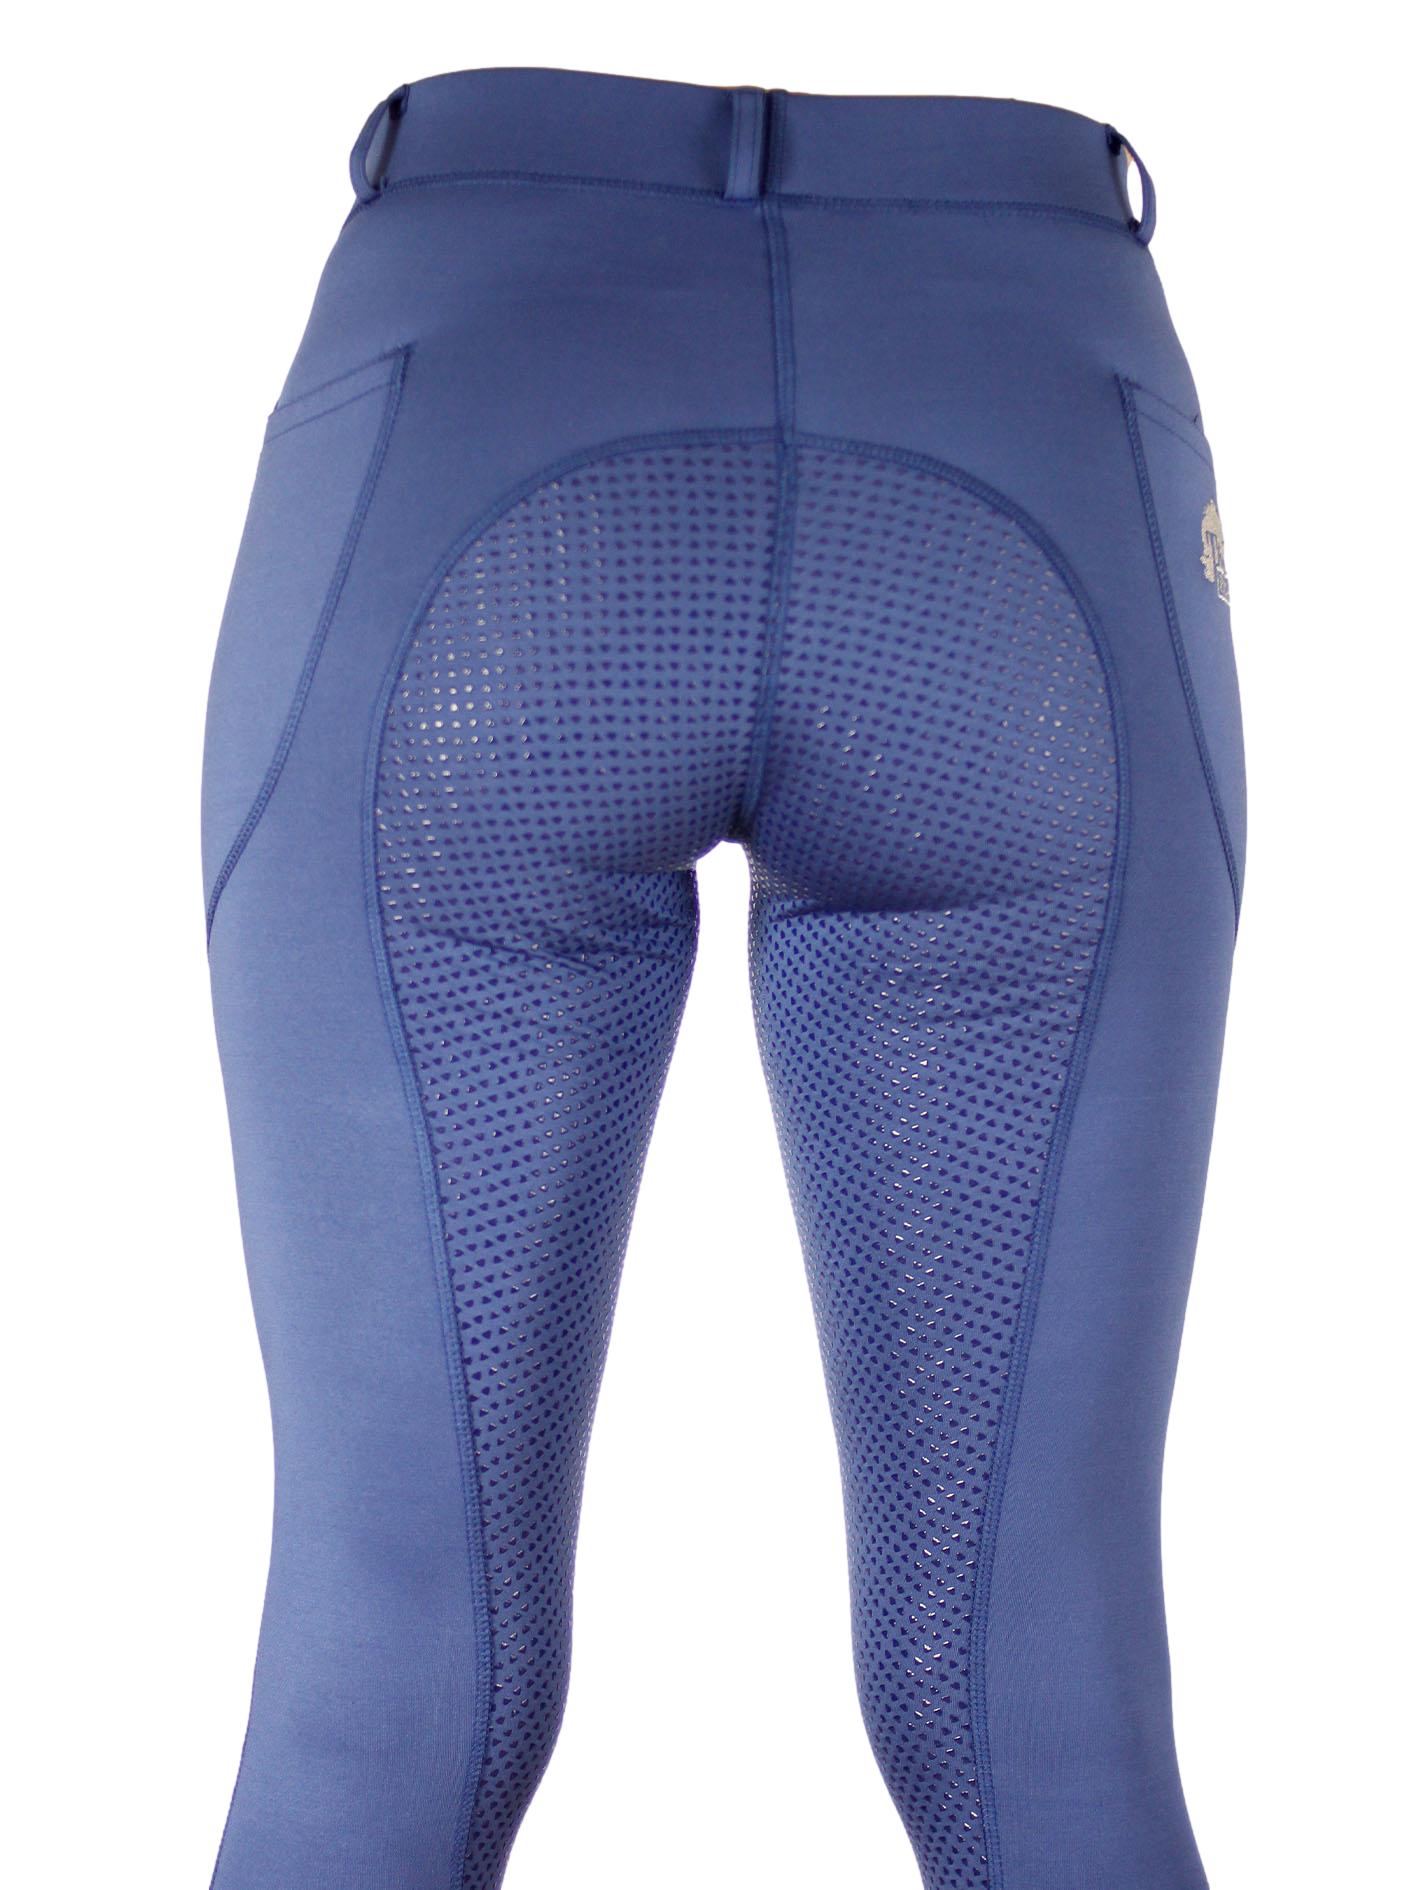 Blue horse riding tights with mesh ventilation on white background.